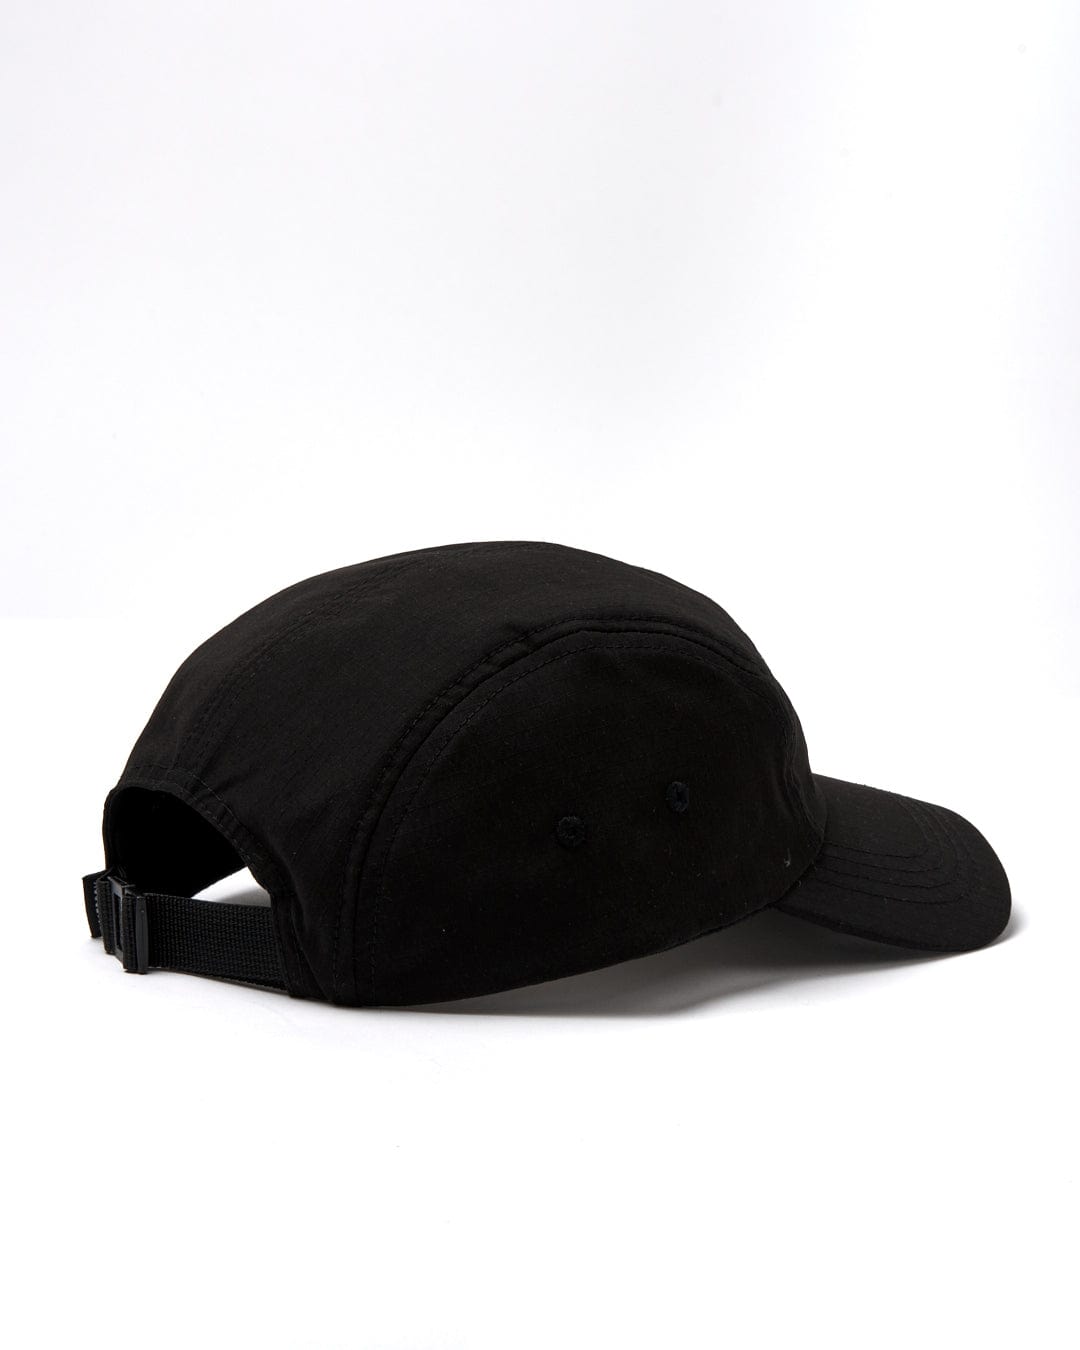 A Saltrock Gaitor 5 Panel UPF Cap in Black with an adjustable strap on a white background.